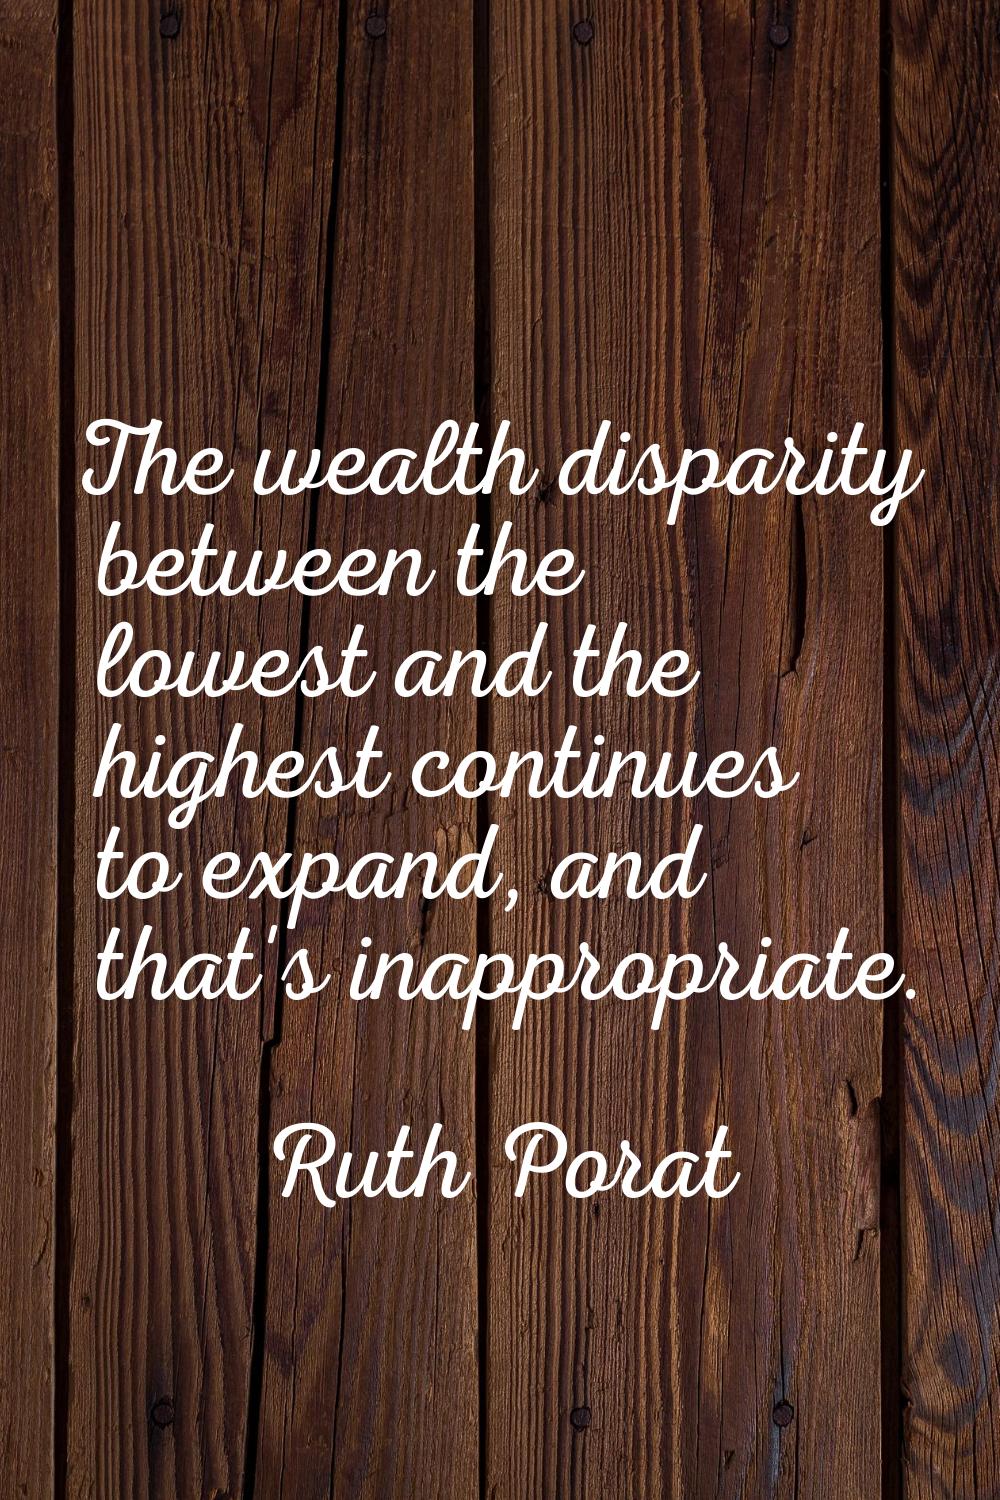 The wealth disparity between the lowest and the highest continues to expand, and that's inappropria